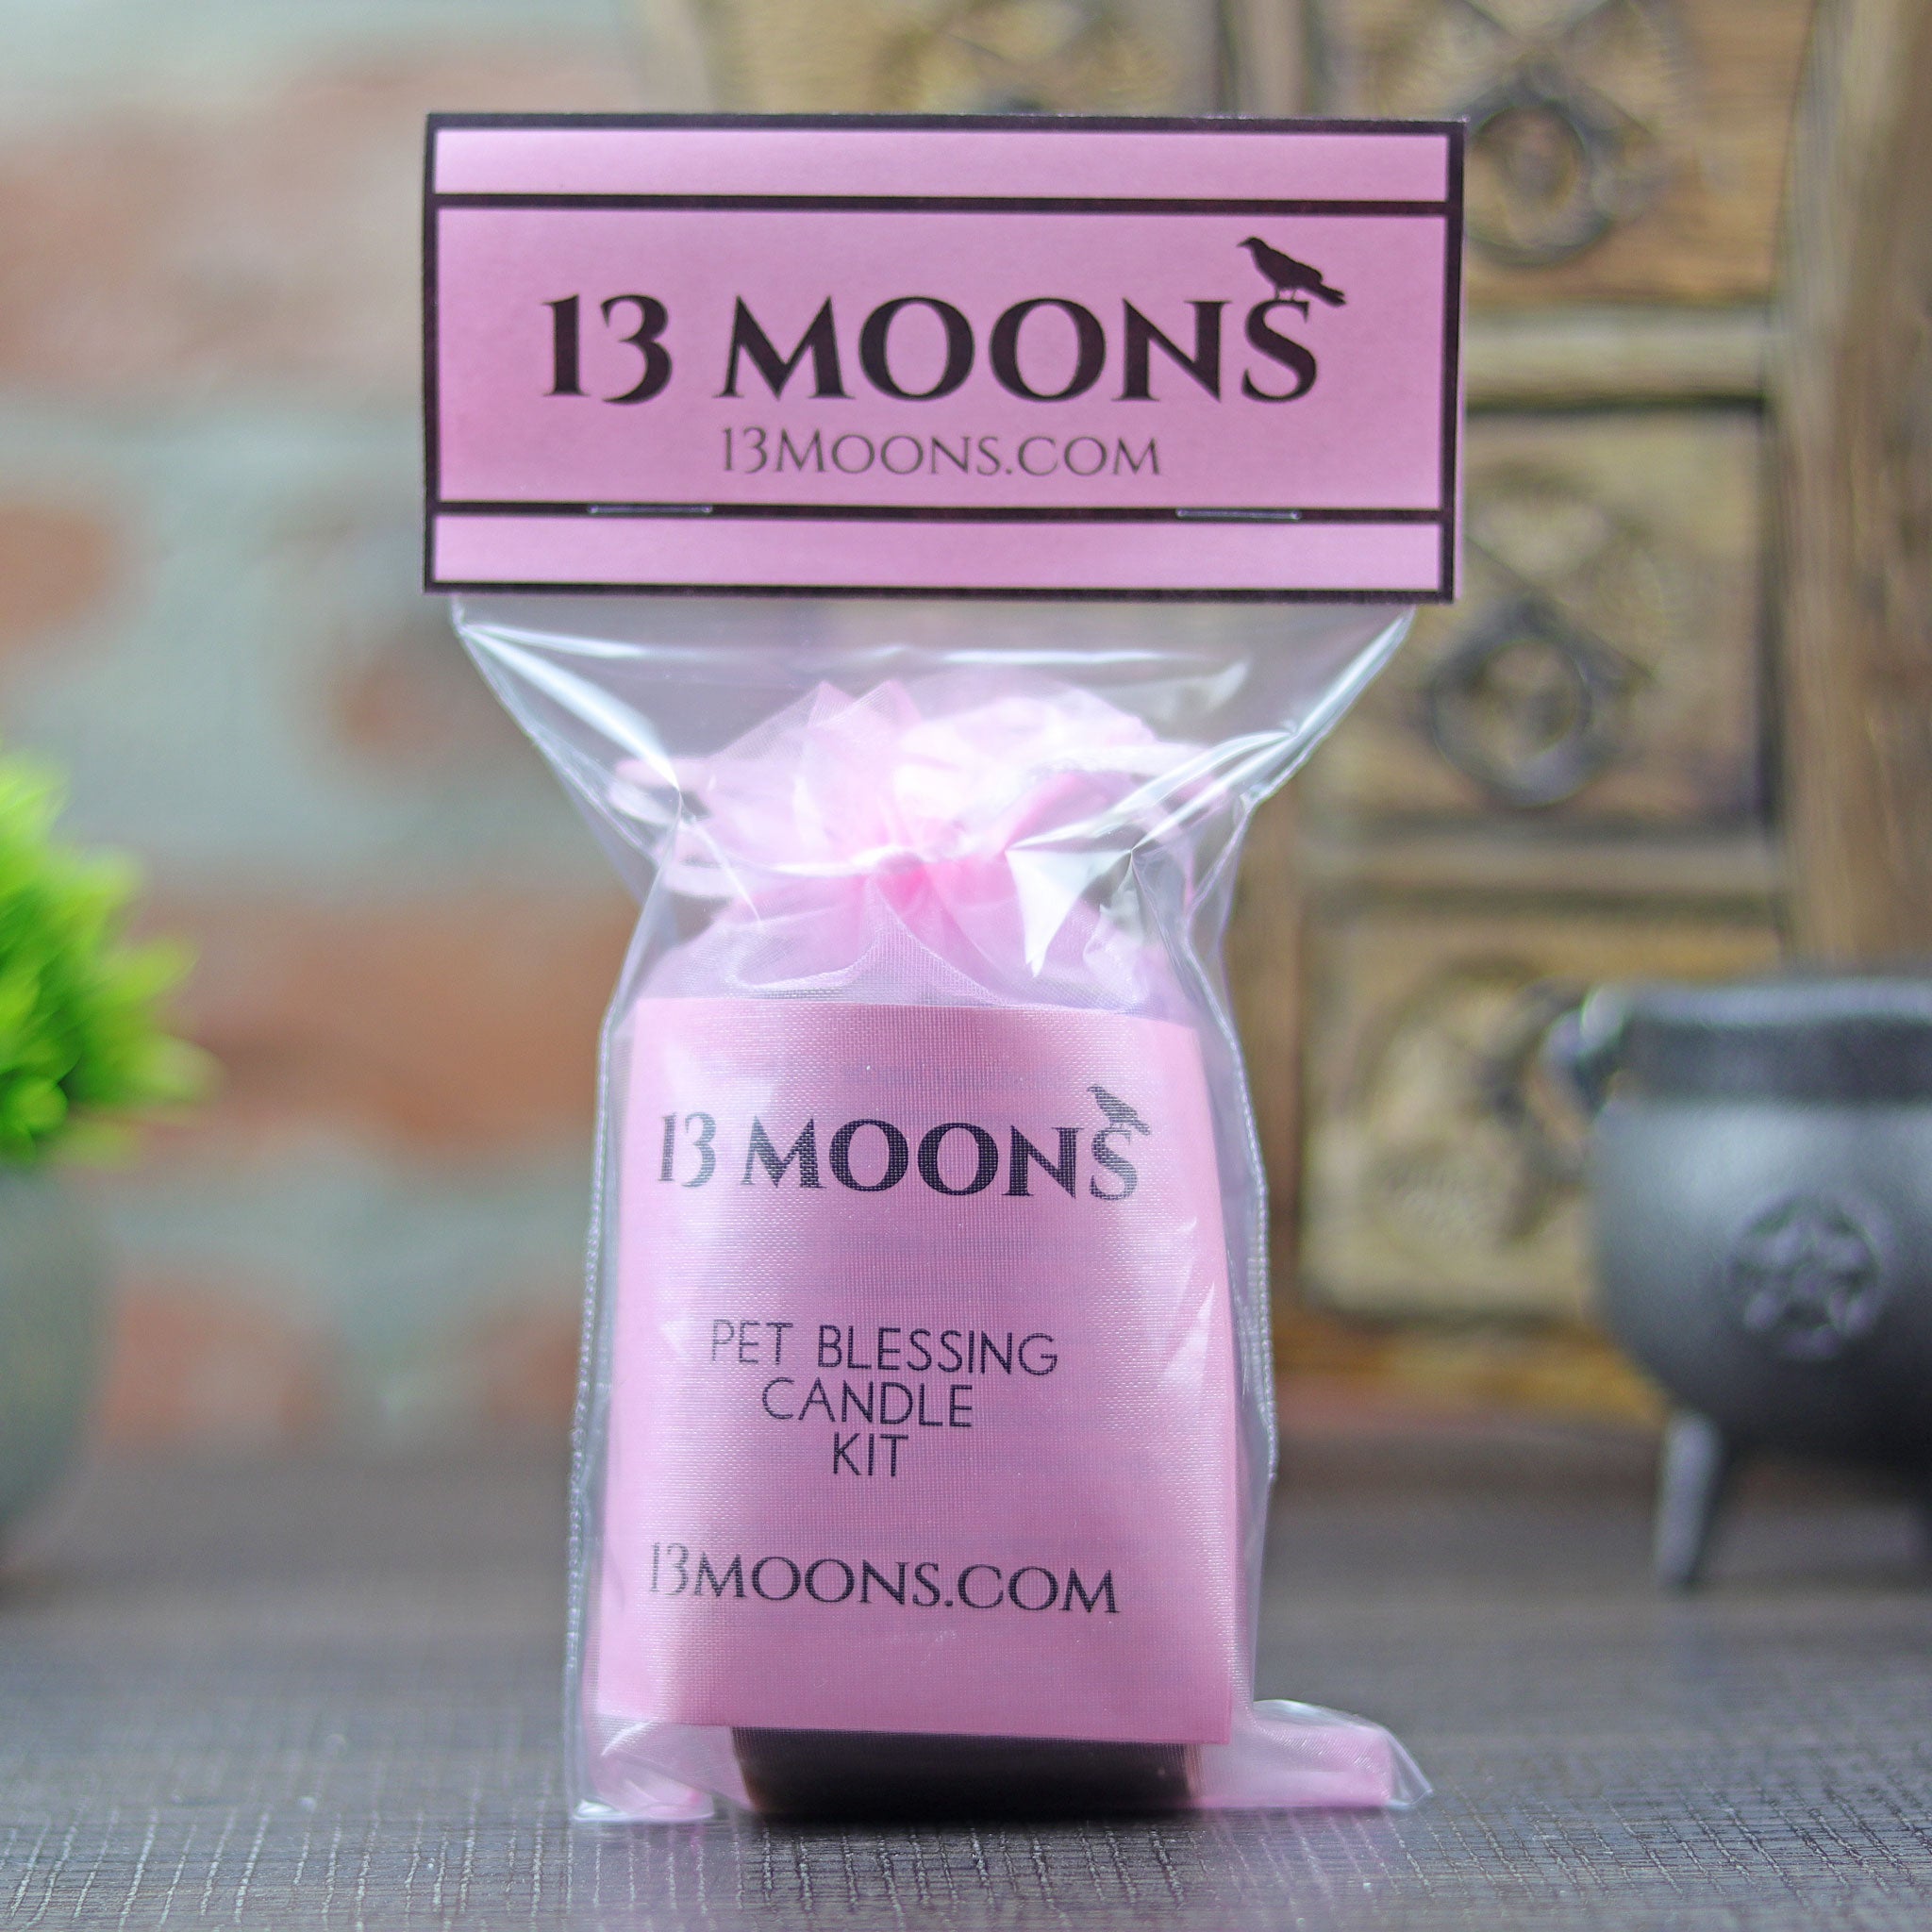 Pet Blessing Candle Kit - 13 Moons